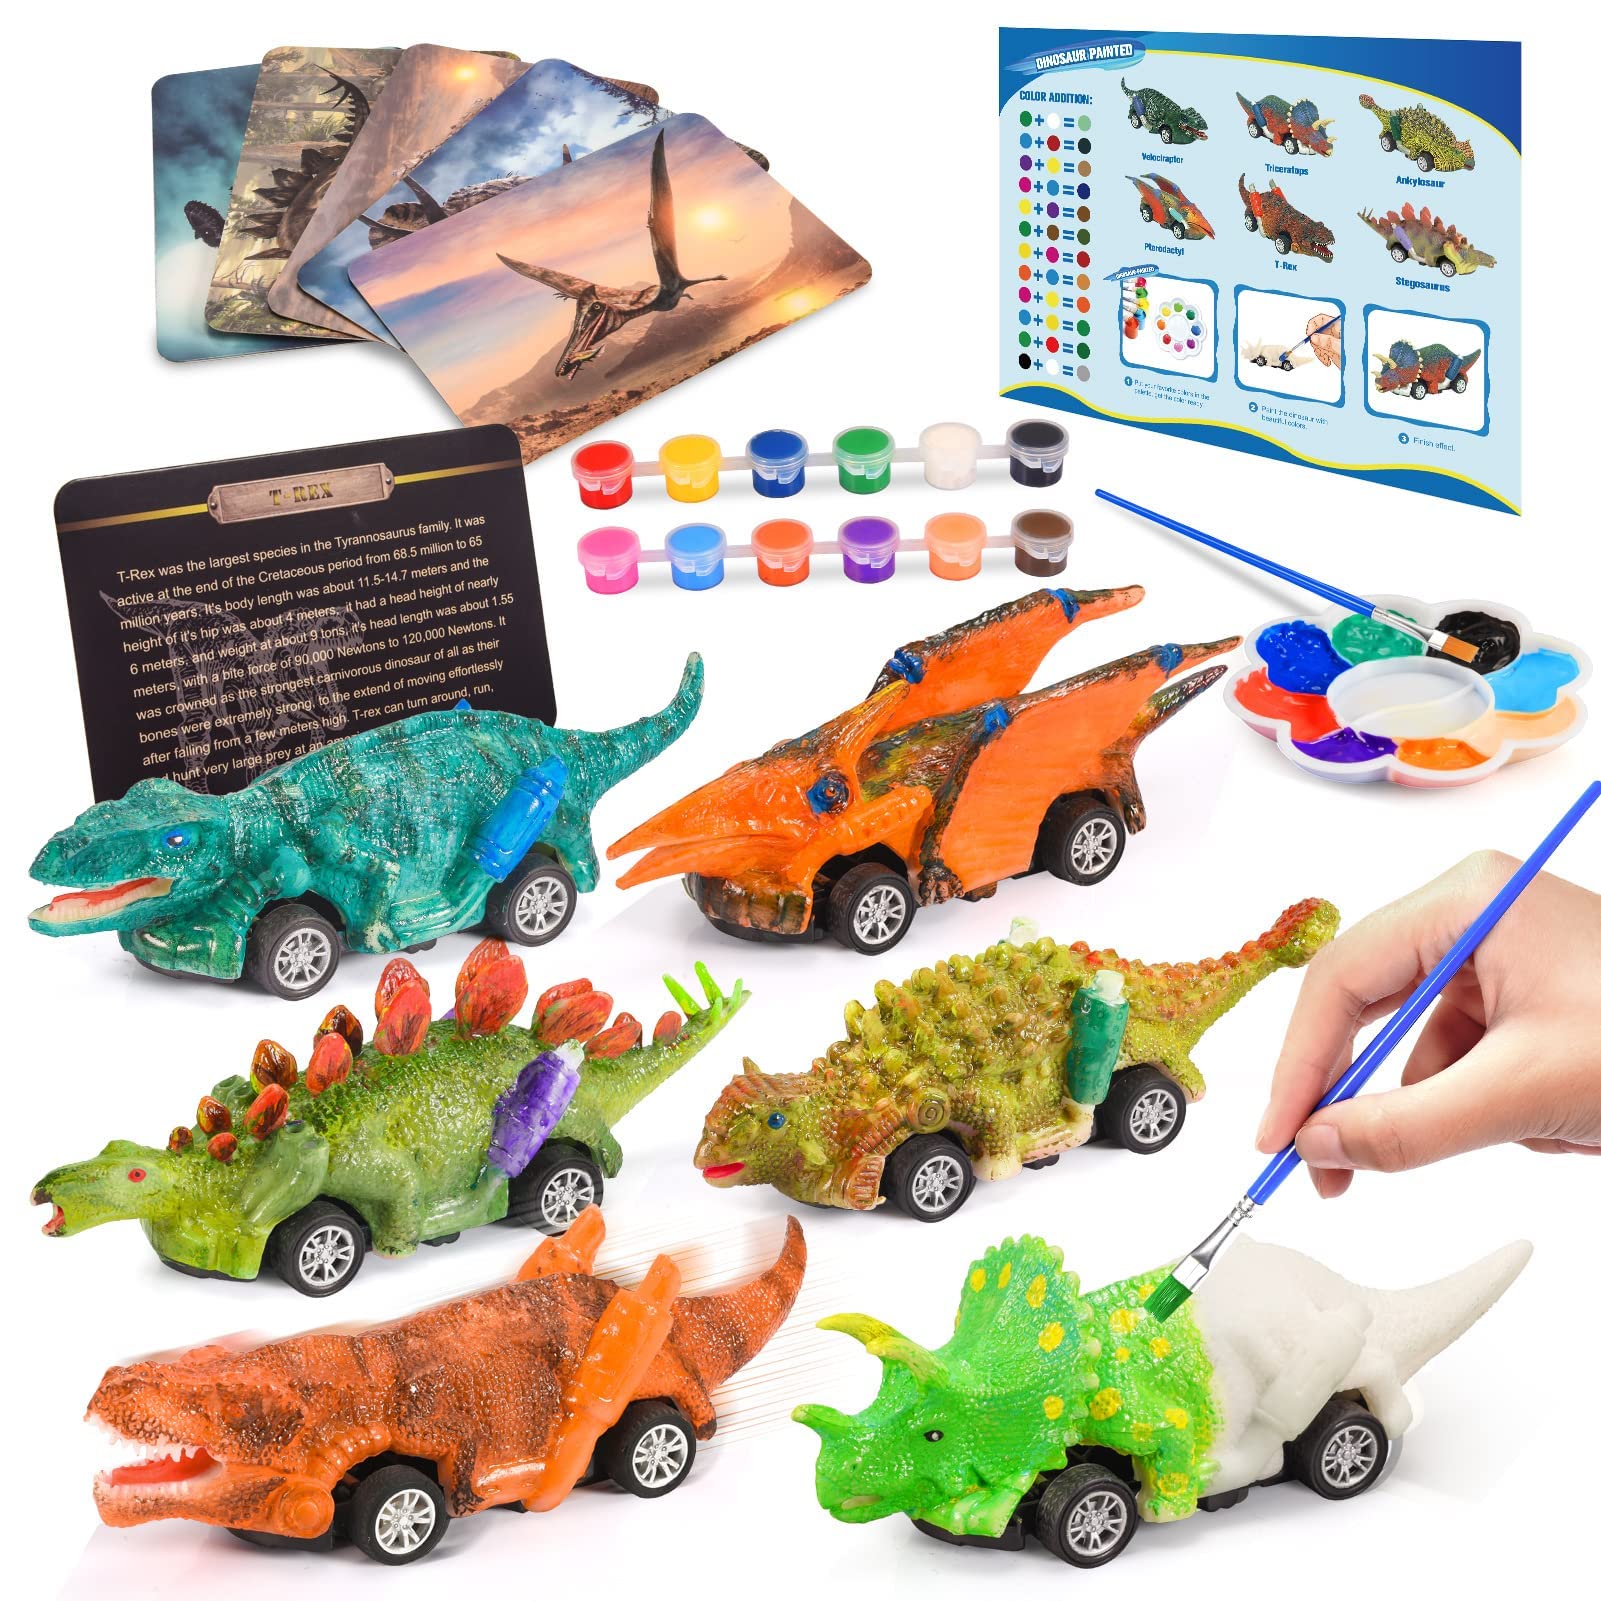 faentwc Dinosaur Toys for Kids 3-12 Year Old 2 in 1 Dinosaurs Painting Kits and Pull Back Cars Toy for Boys 5-7 Arts and Crafts Set for Girl DIY Birthday for Kid Age 4 5 6 7 8 9 10